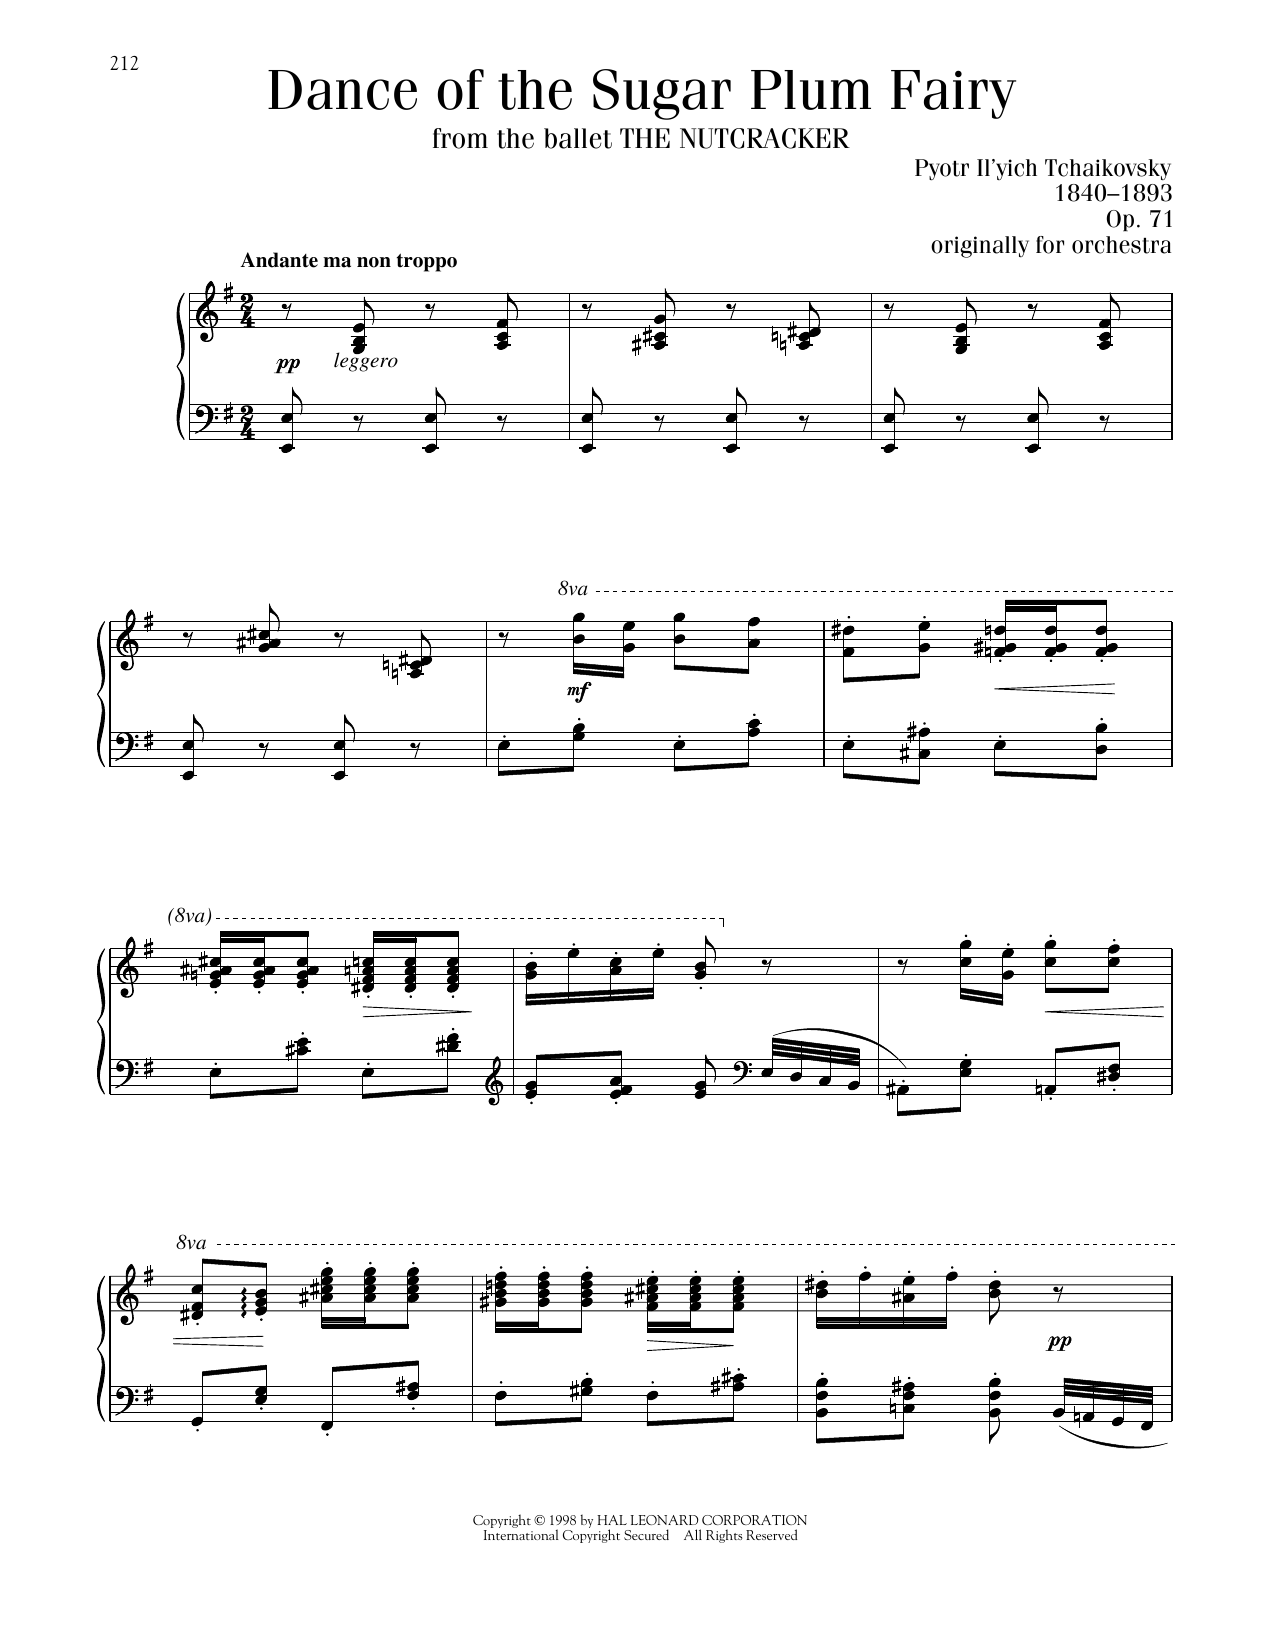 Pyotr Il'yich Tchaikovsky Dance Of The Sugar Plum Fairy, Op. 71a sheet music notes printable PDF score